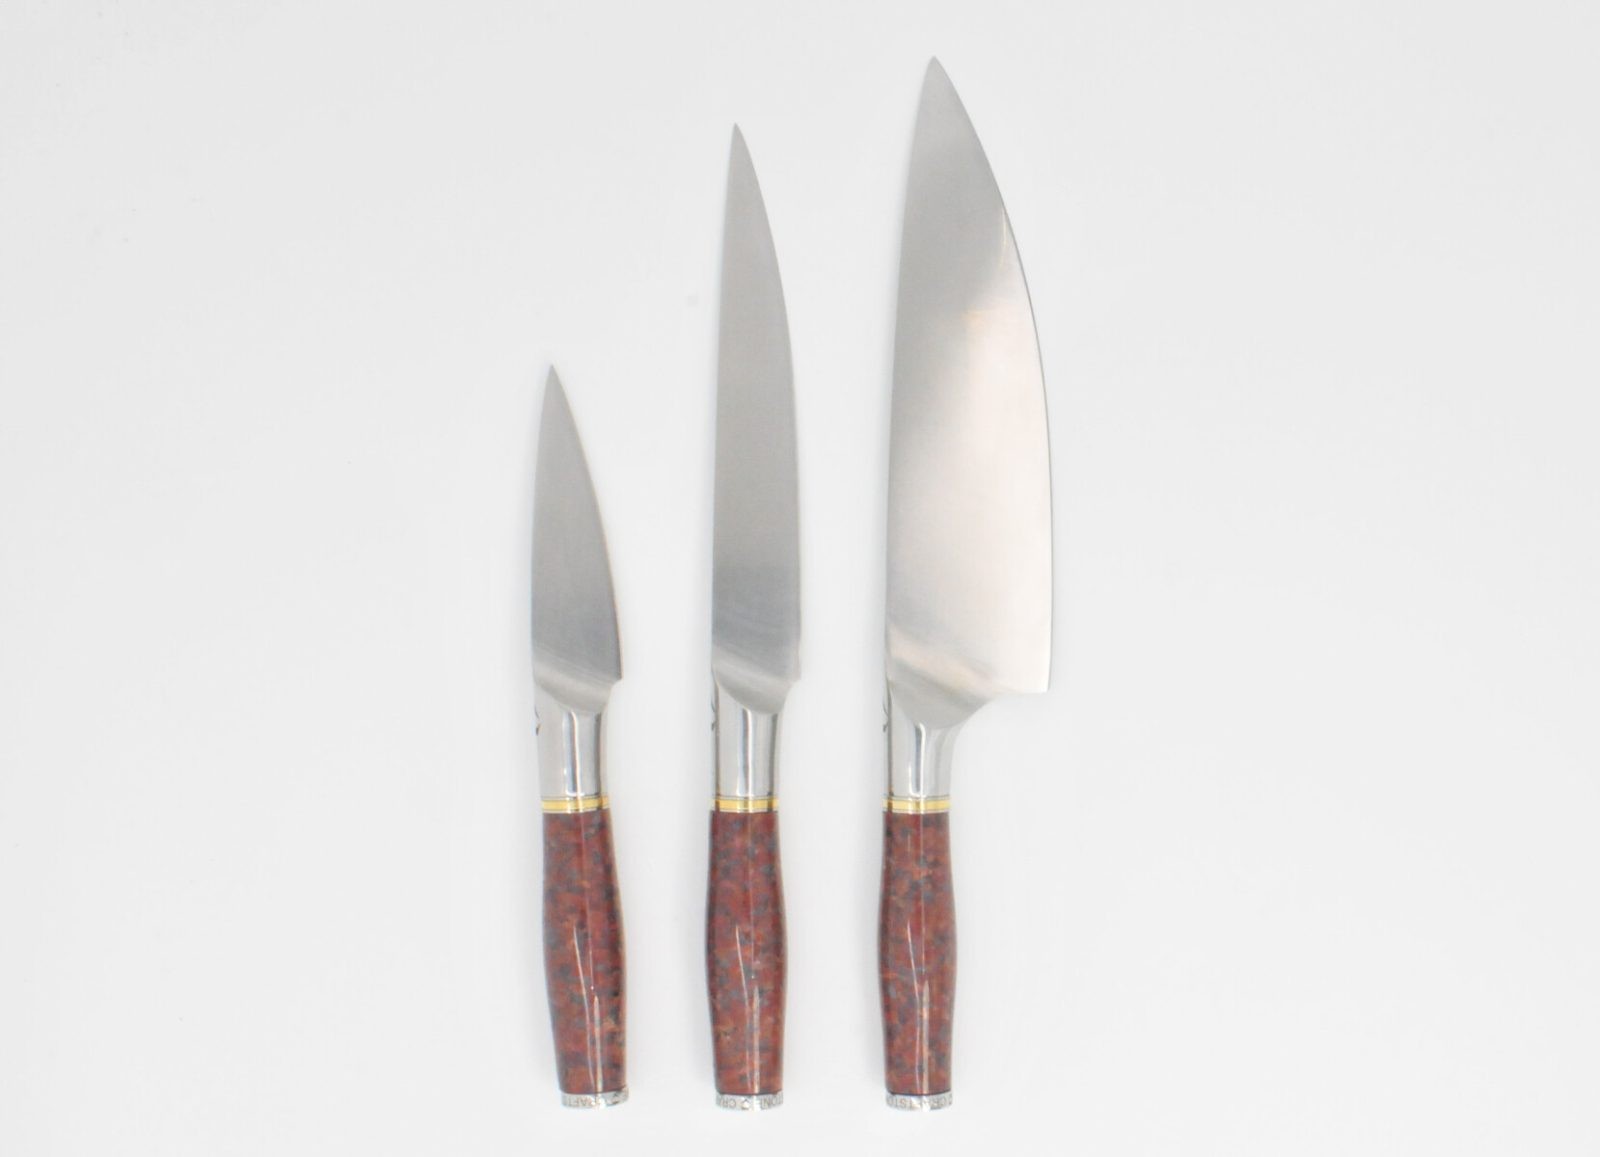 https://www.craftstoneknives.com/wp-content/uploads/2019/09/3-Knife-Set-with-a-Red-Granite-Handle-a-Garnet-Colored-Cubic-Zirconia-Stone-at-the-Back-of-the-Knife-and-Brass-and-Stainless-Steel-Decorative-Rings.jpg